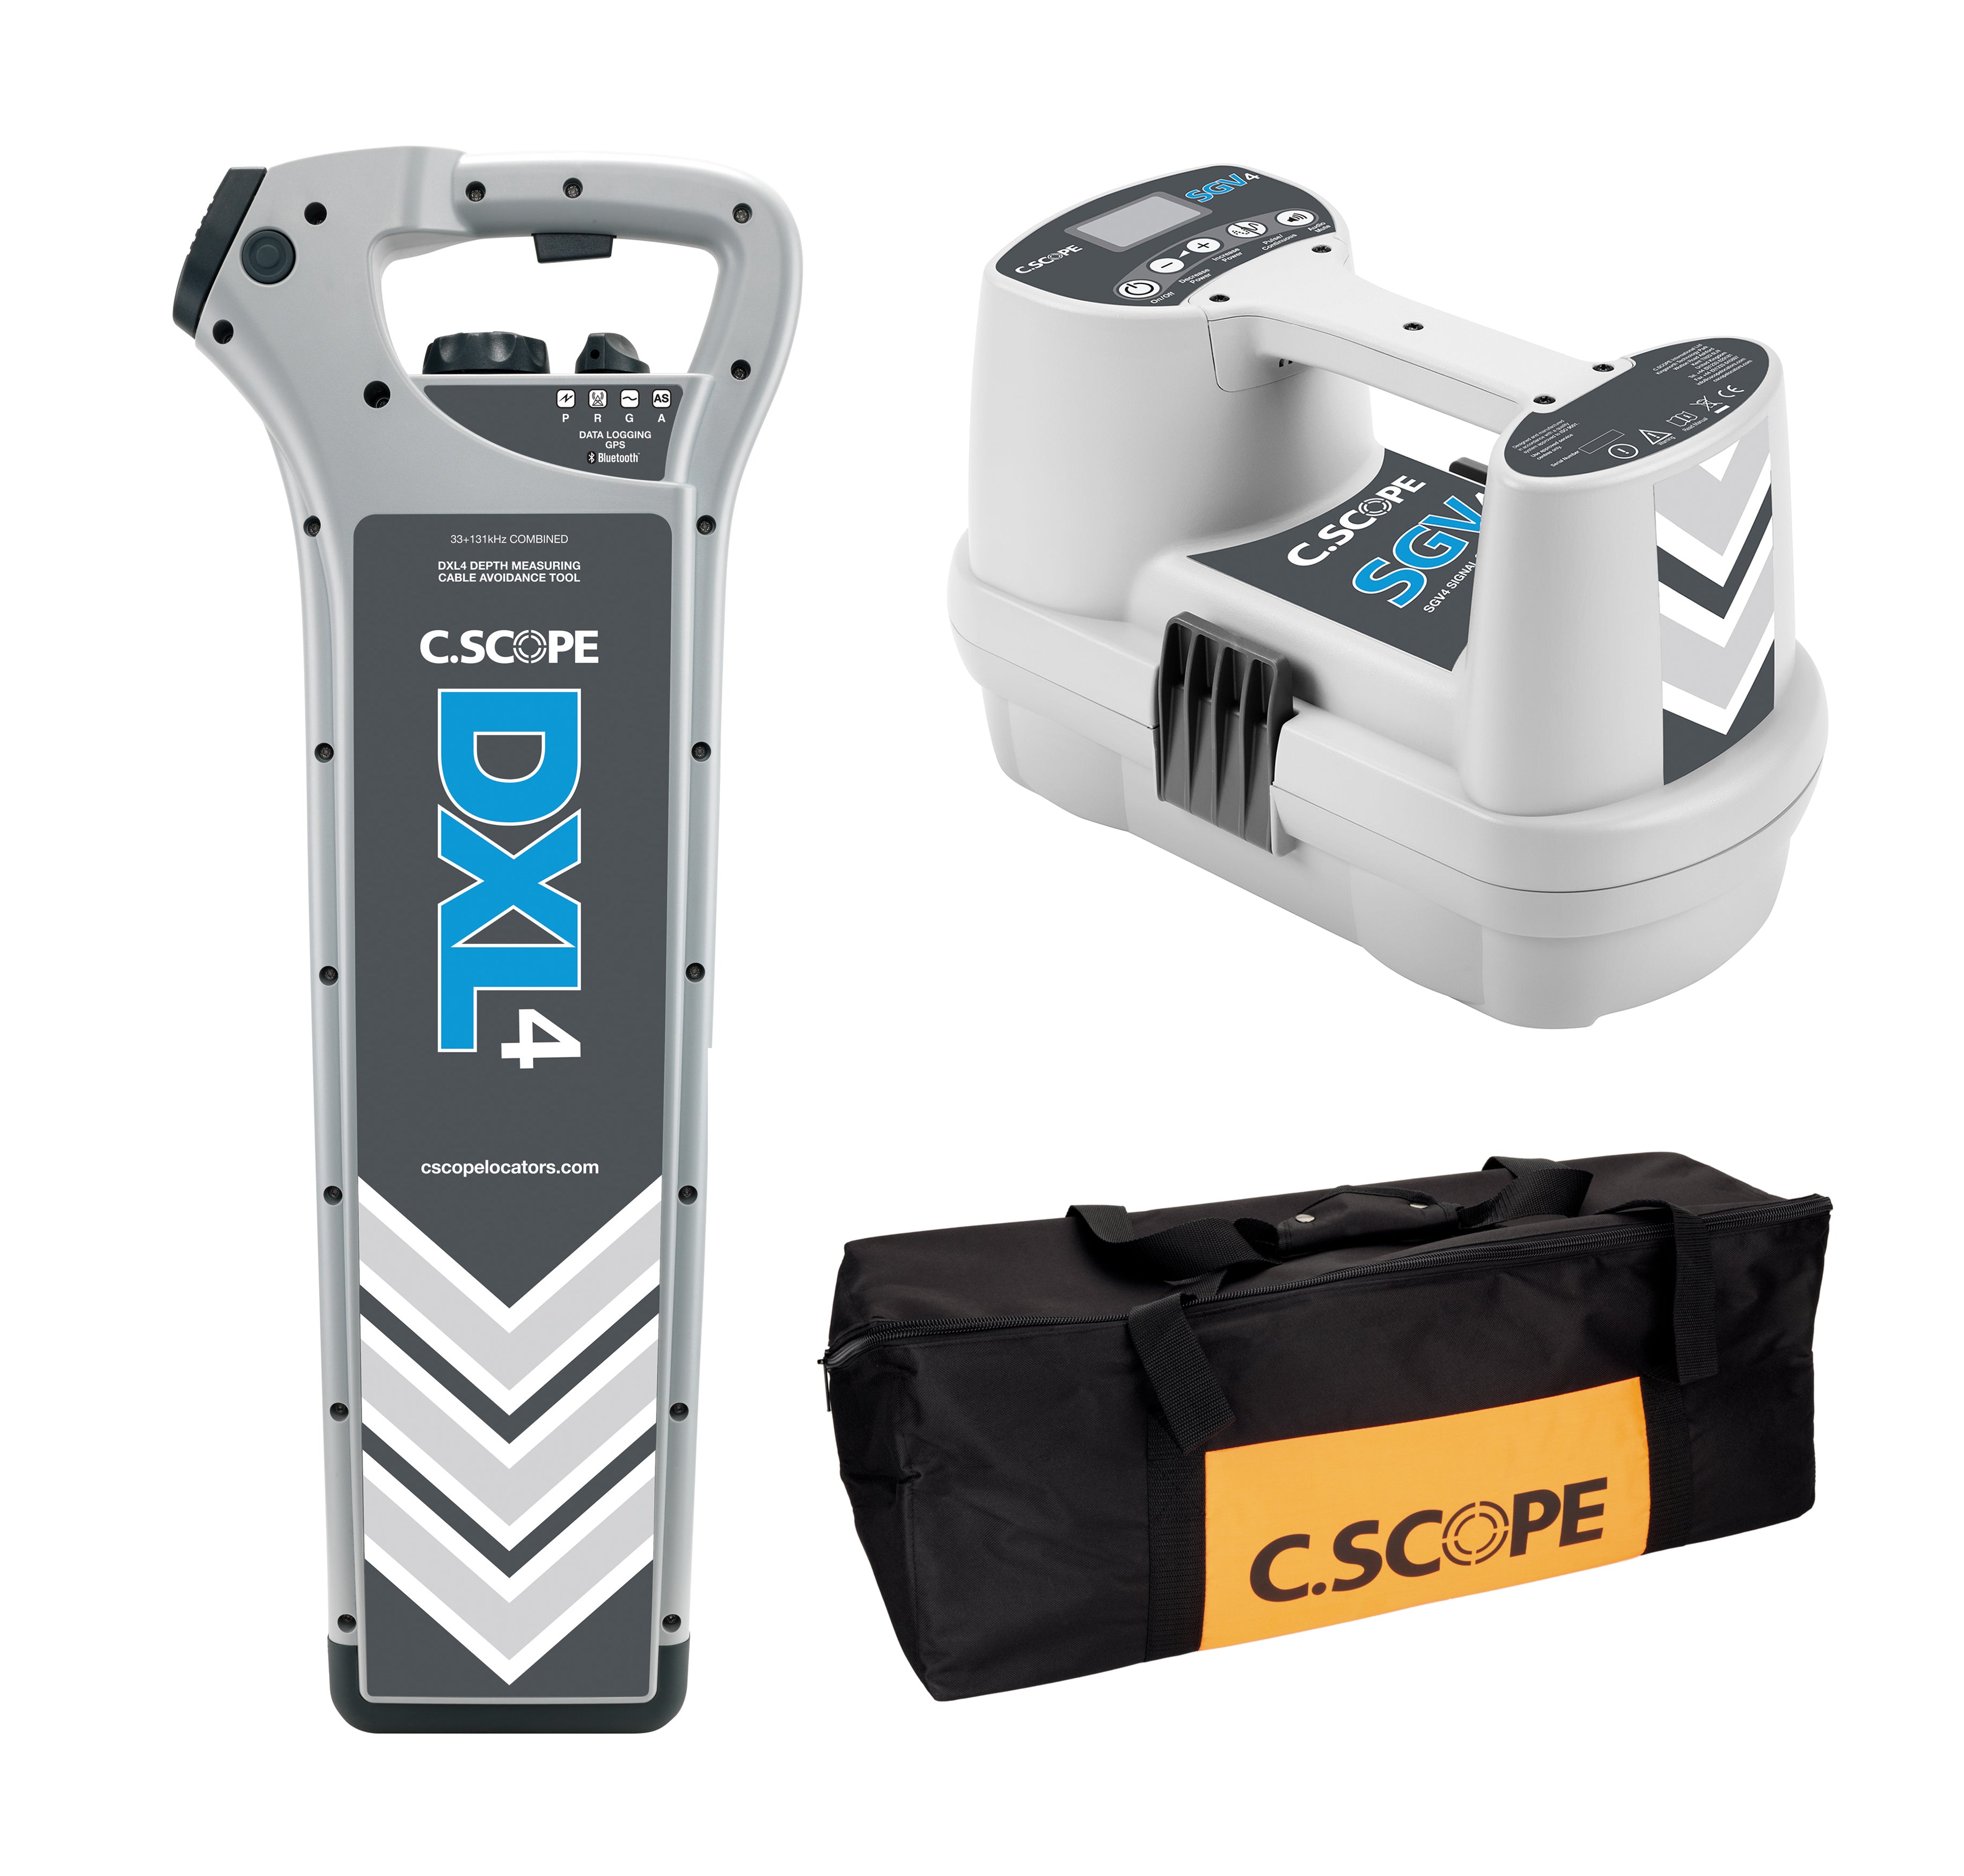 C.Scope DXL4-DBG Depth, Datalogging and GPS Cable Avoidance Kit with SGV4 and Bag - Subtech Safety Limited